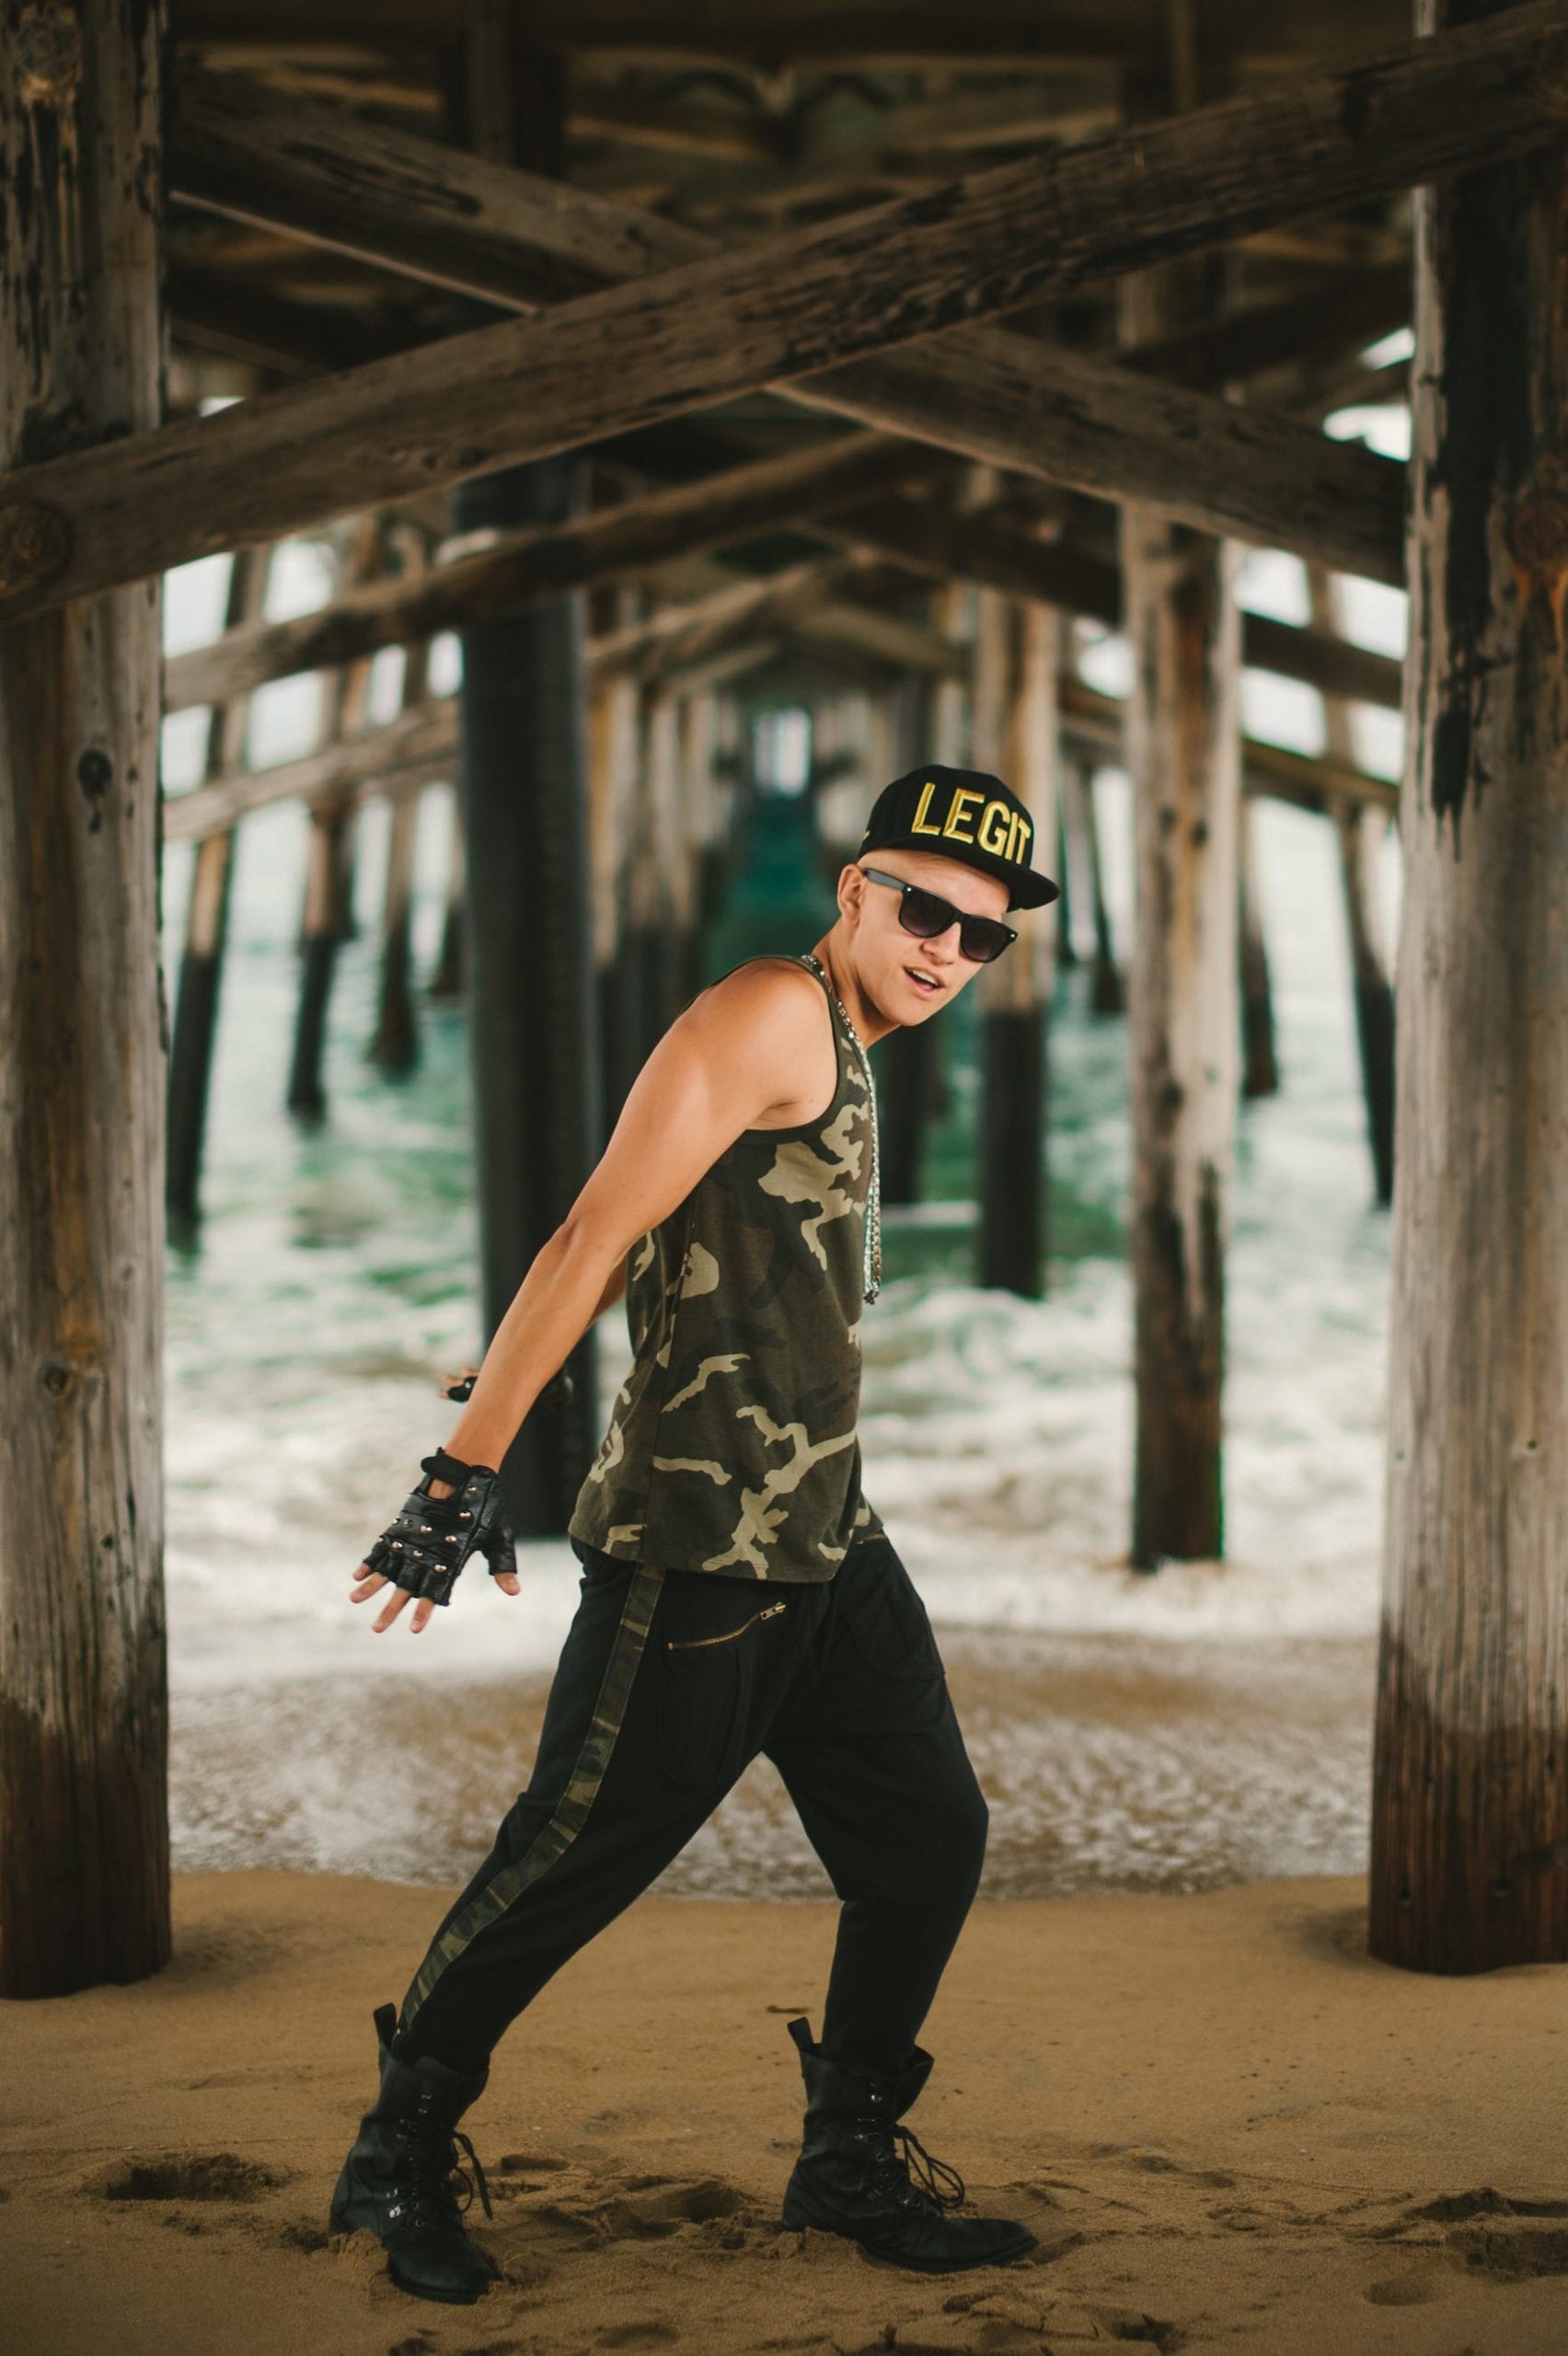 Sammy C Side profile of man standing under a pier wearing a camo shirt, black pants and military boots, black cap with LEGIT written on it in gold and sunglasses posing for the camera